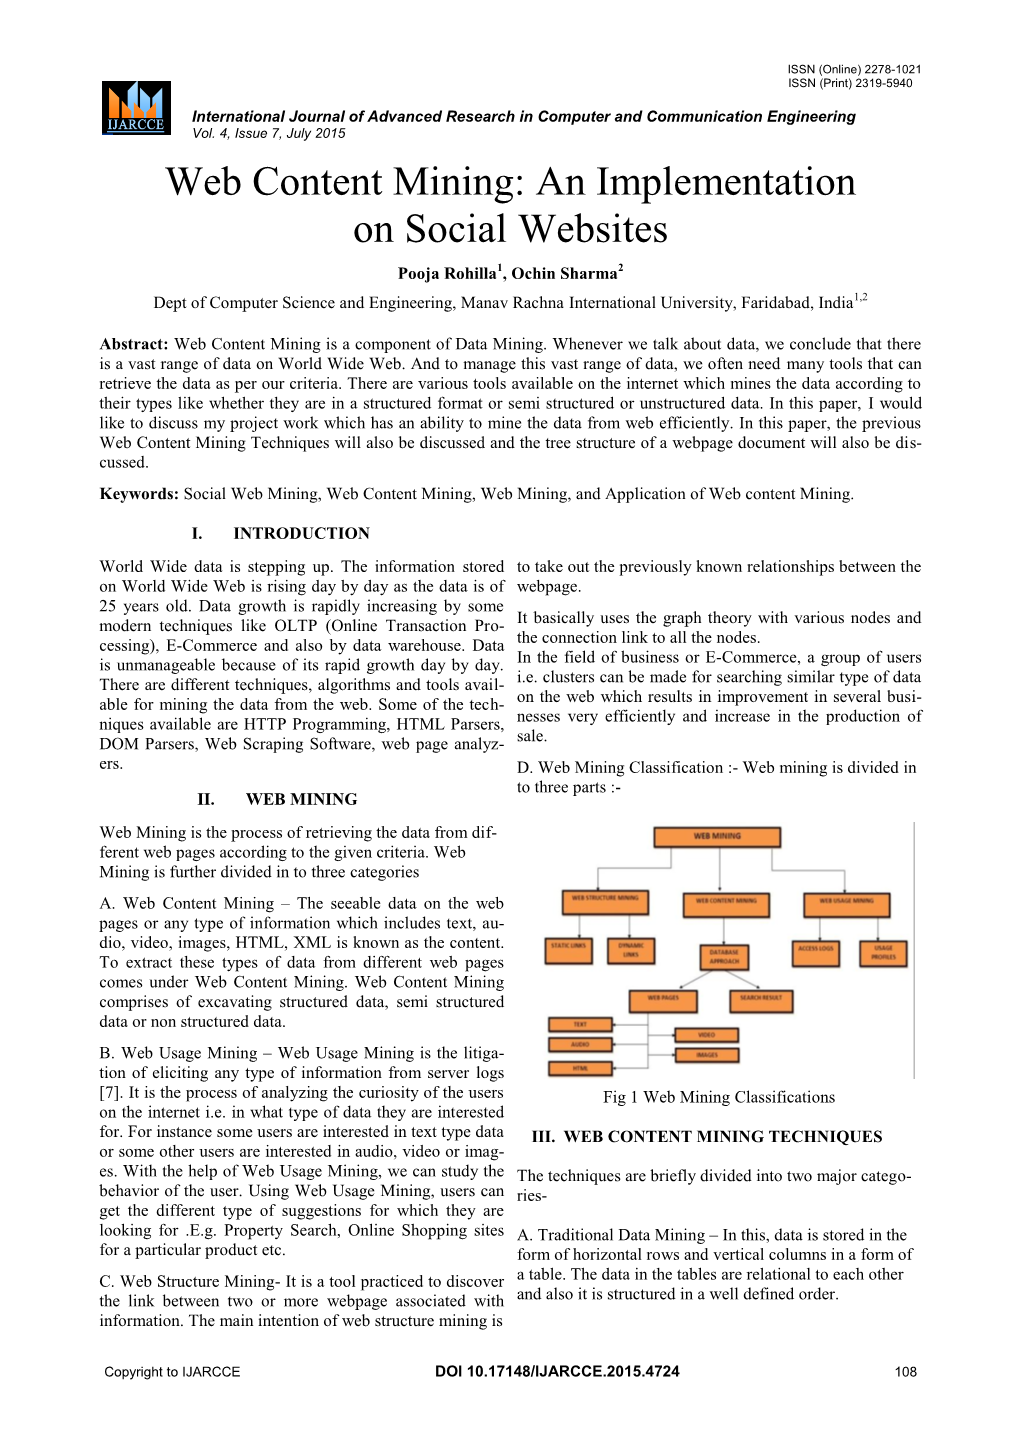 Web Content Mining: an Implementation on Social Websites